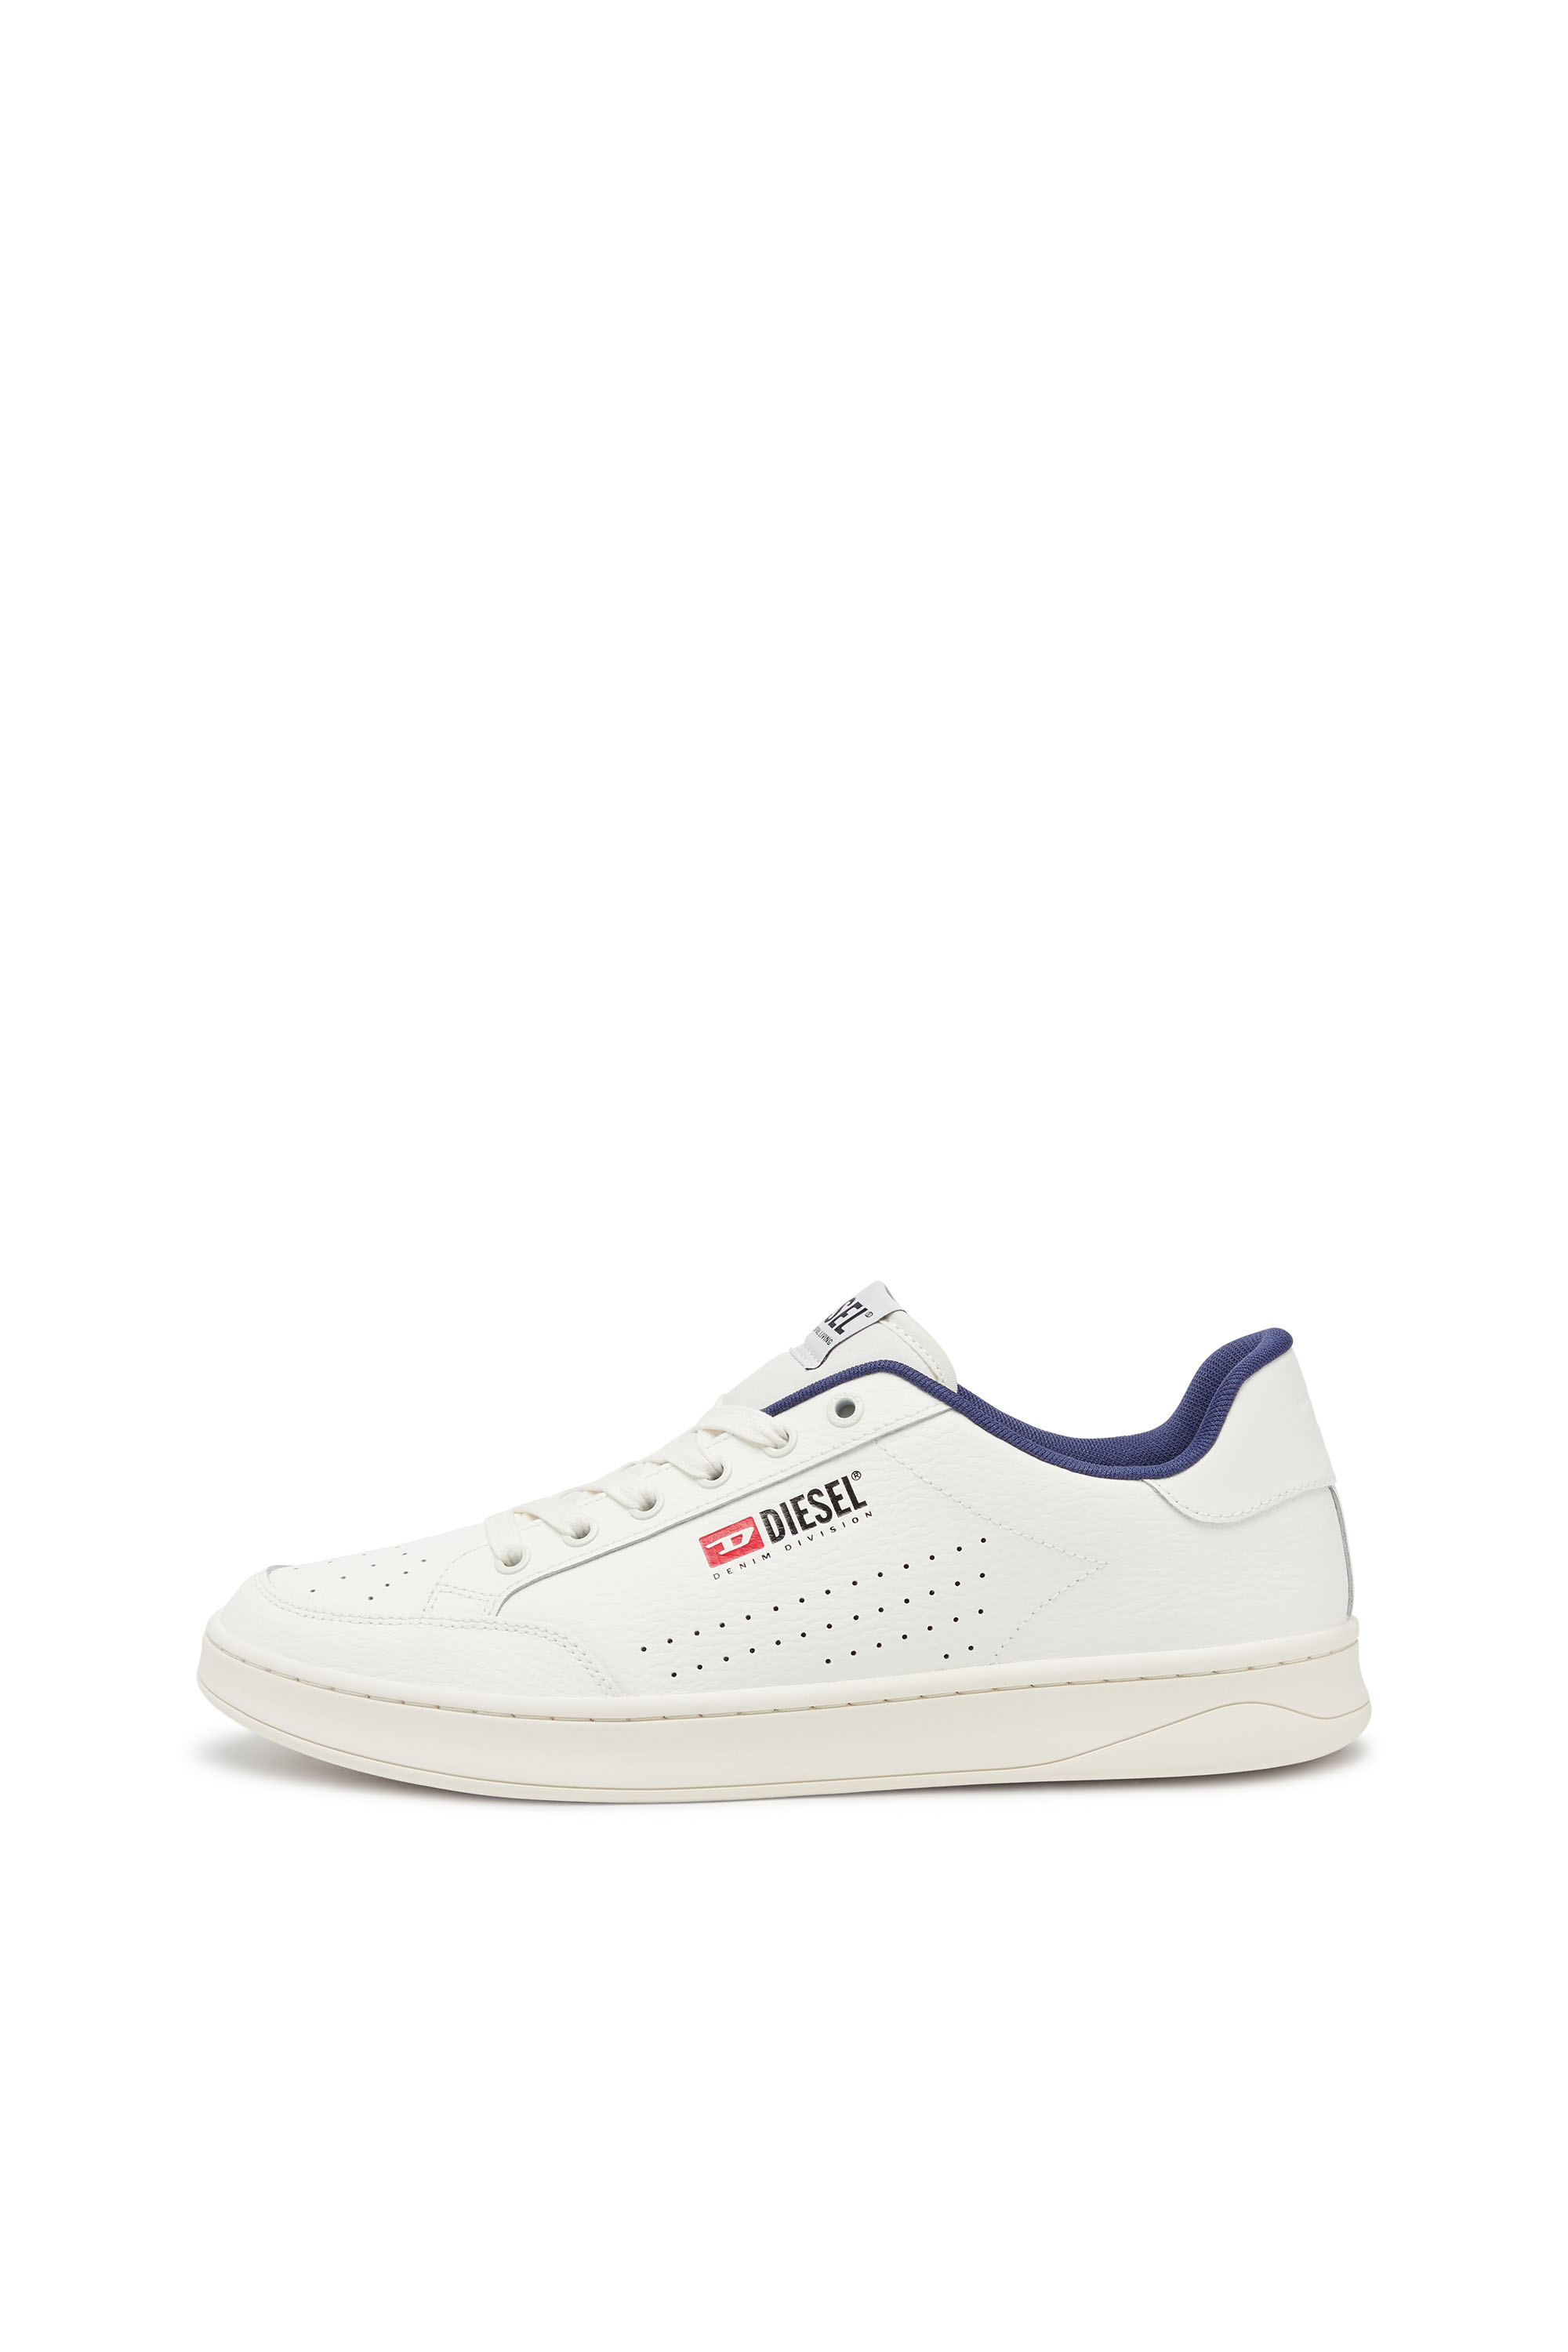 Diesel - S-ATHENE VTG, Man S-Athene-Retro sneakers in perforated leather in Multicolor - Image 7